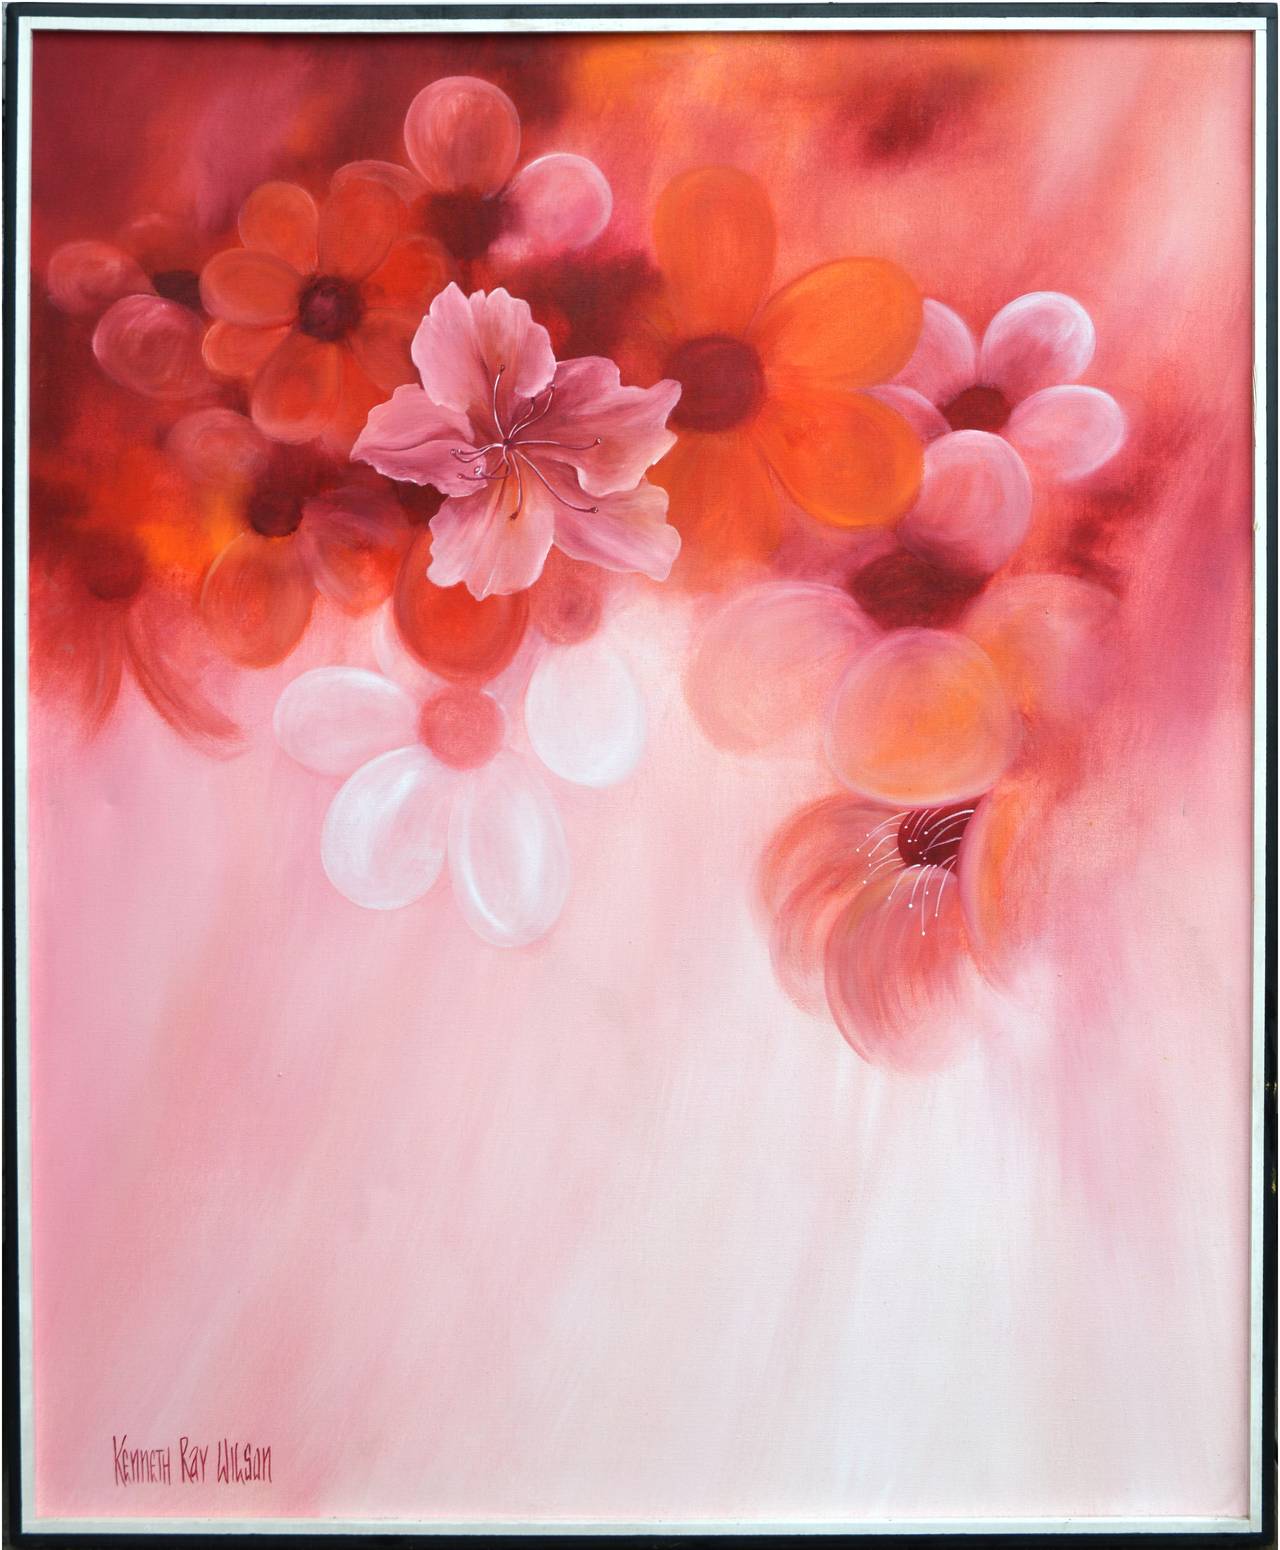 Gorgeous painting of a pink Hibiscus with Jeff Koons-esque balloon flowers by Kenneth Ray Wilson (American, 20th/21st century) perfect for feminine mid century modern interior or office. Signed "Kenneth Ray Wilson" lower left. 
Image,